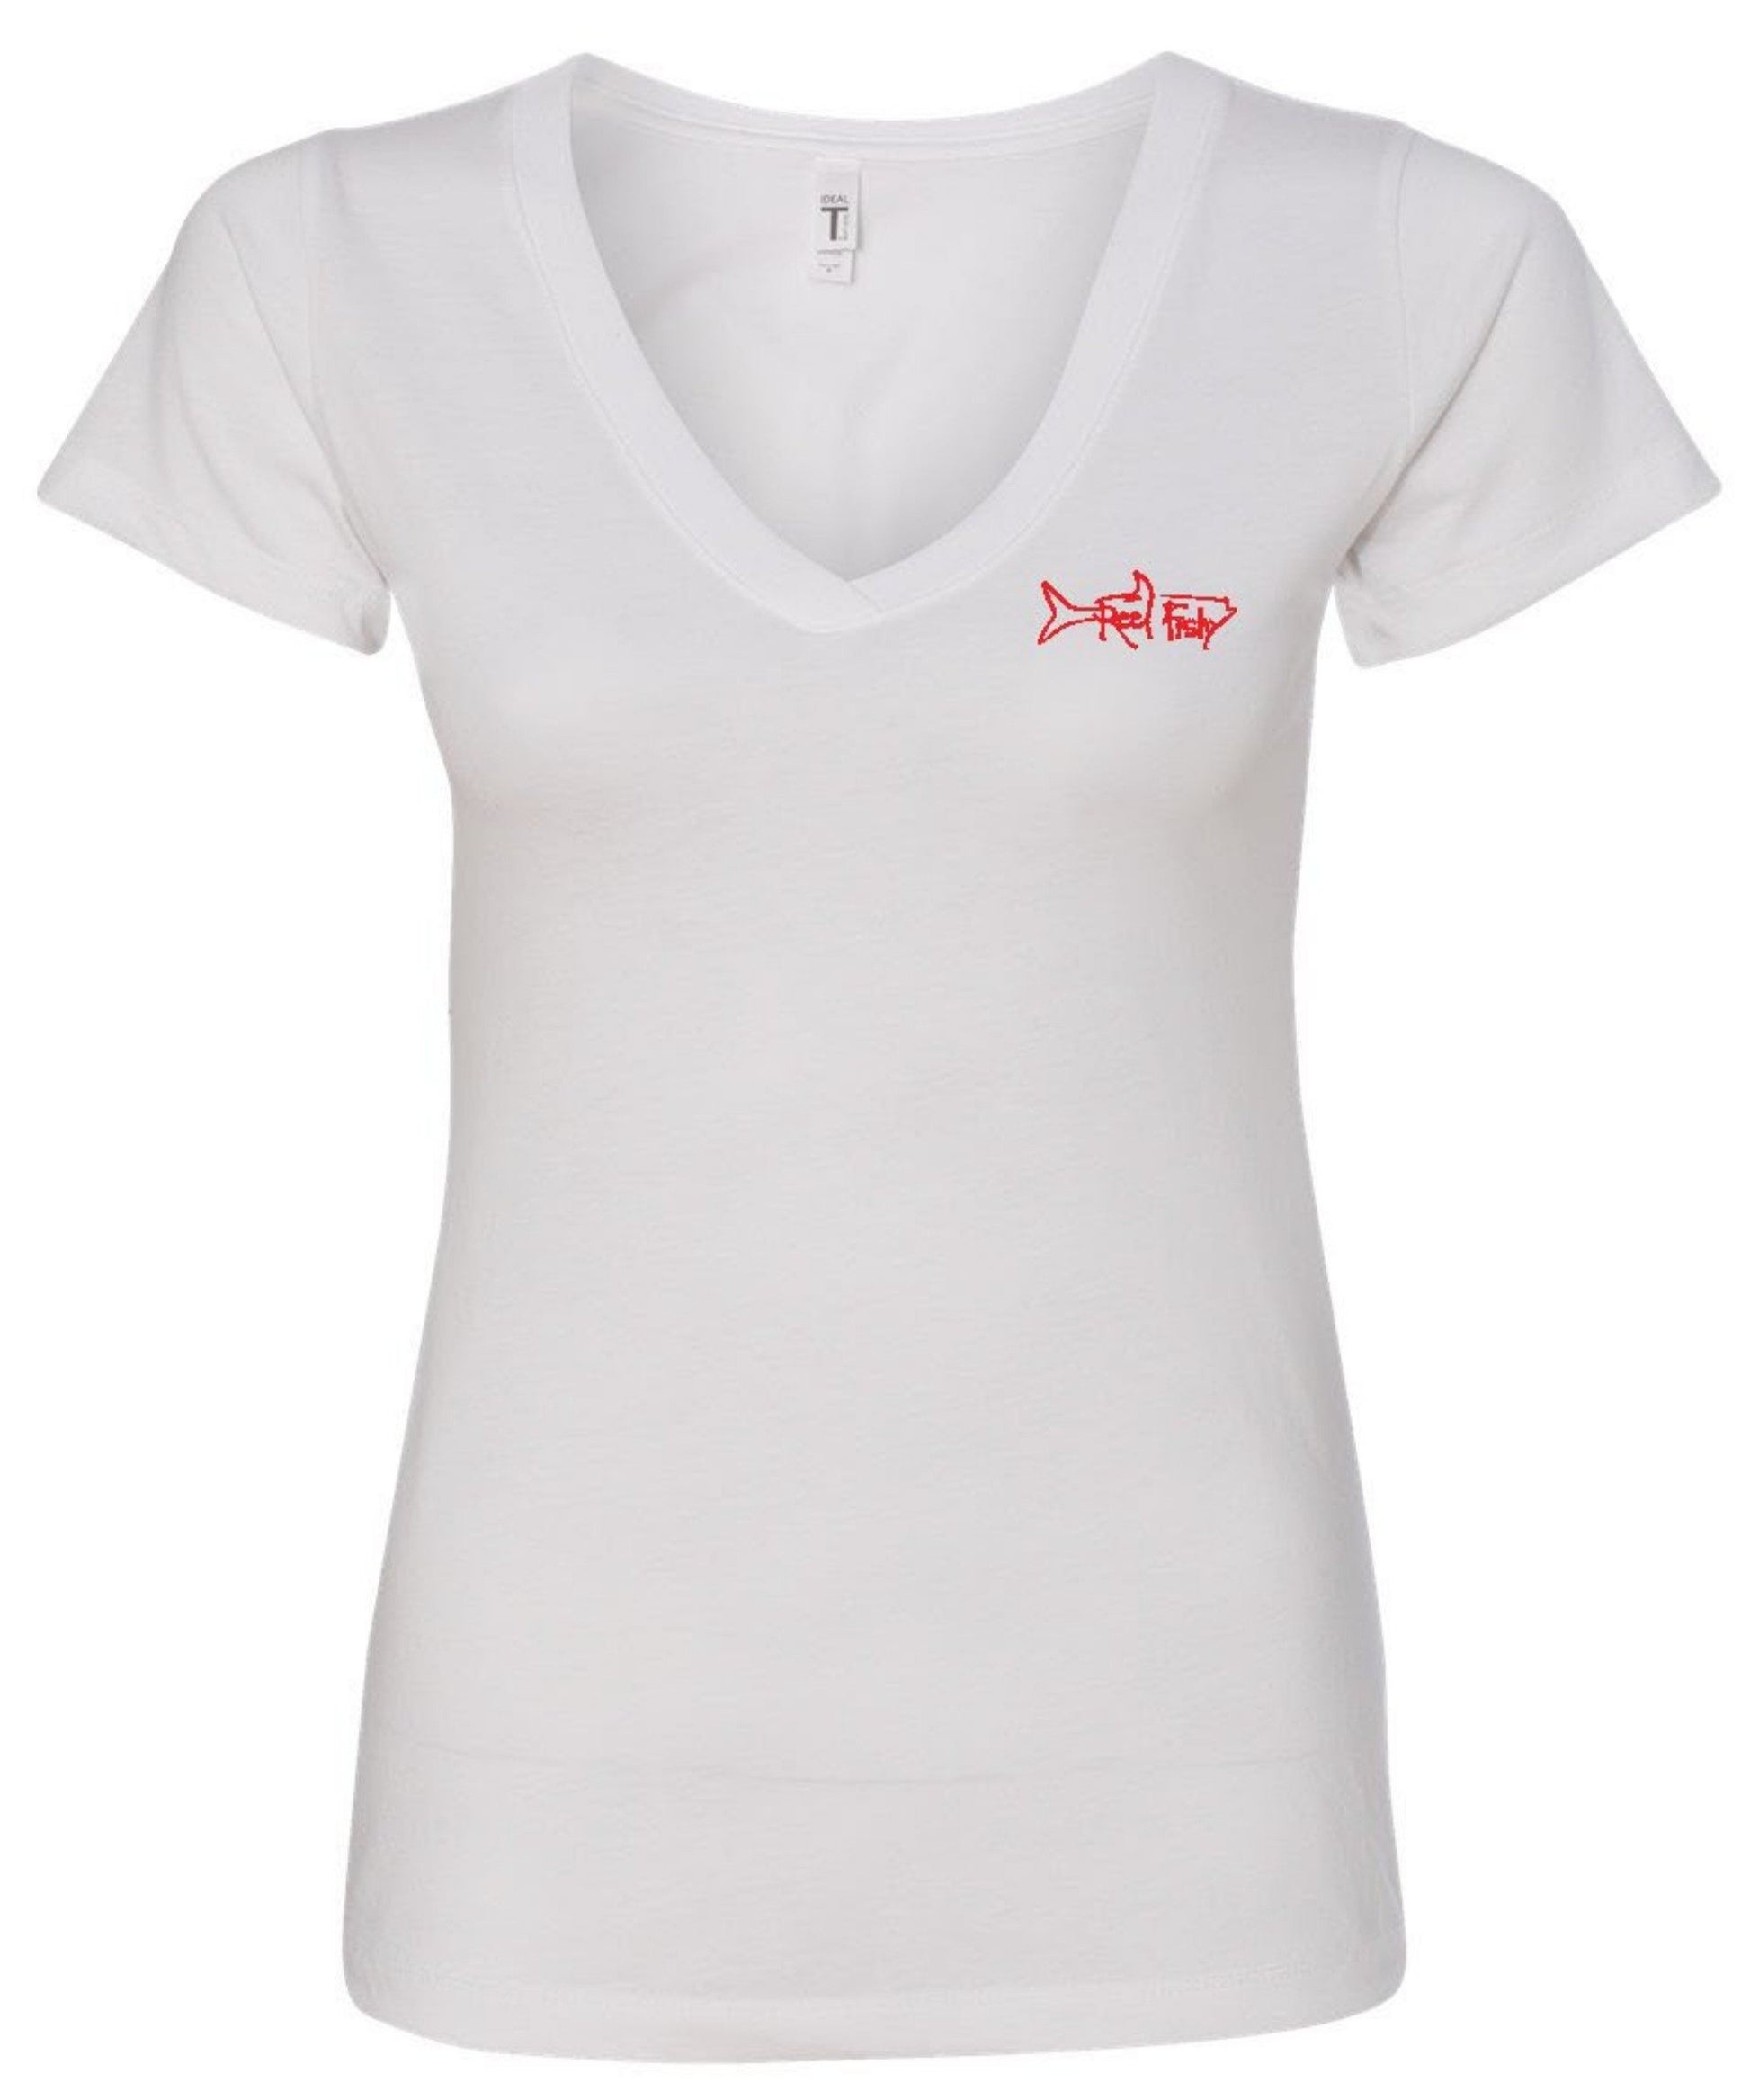 Ladies Lobster V-Neck Tees with "Bug Tickler" Dive Logo in White with Reel Fishy Tarpon logo on Front